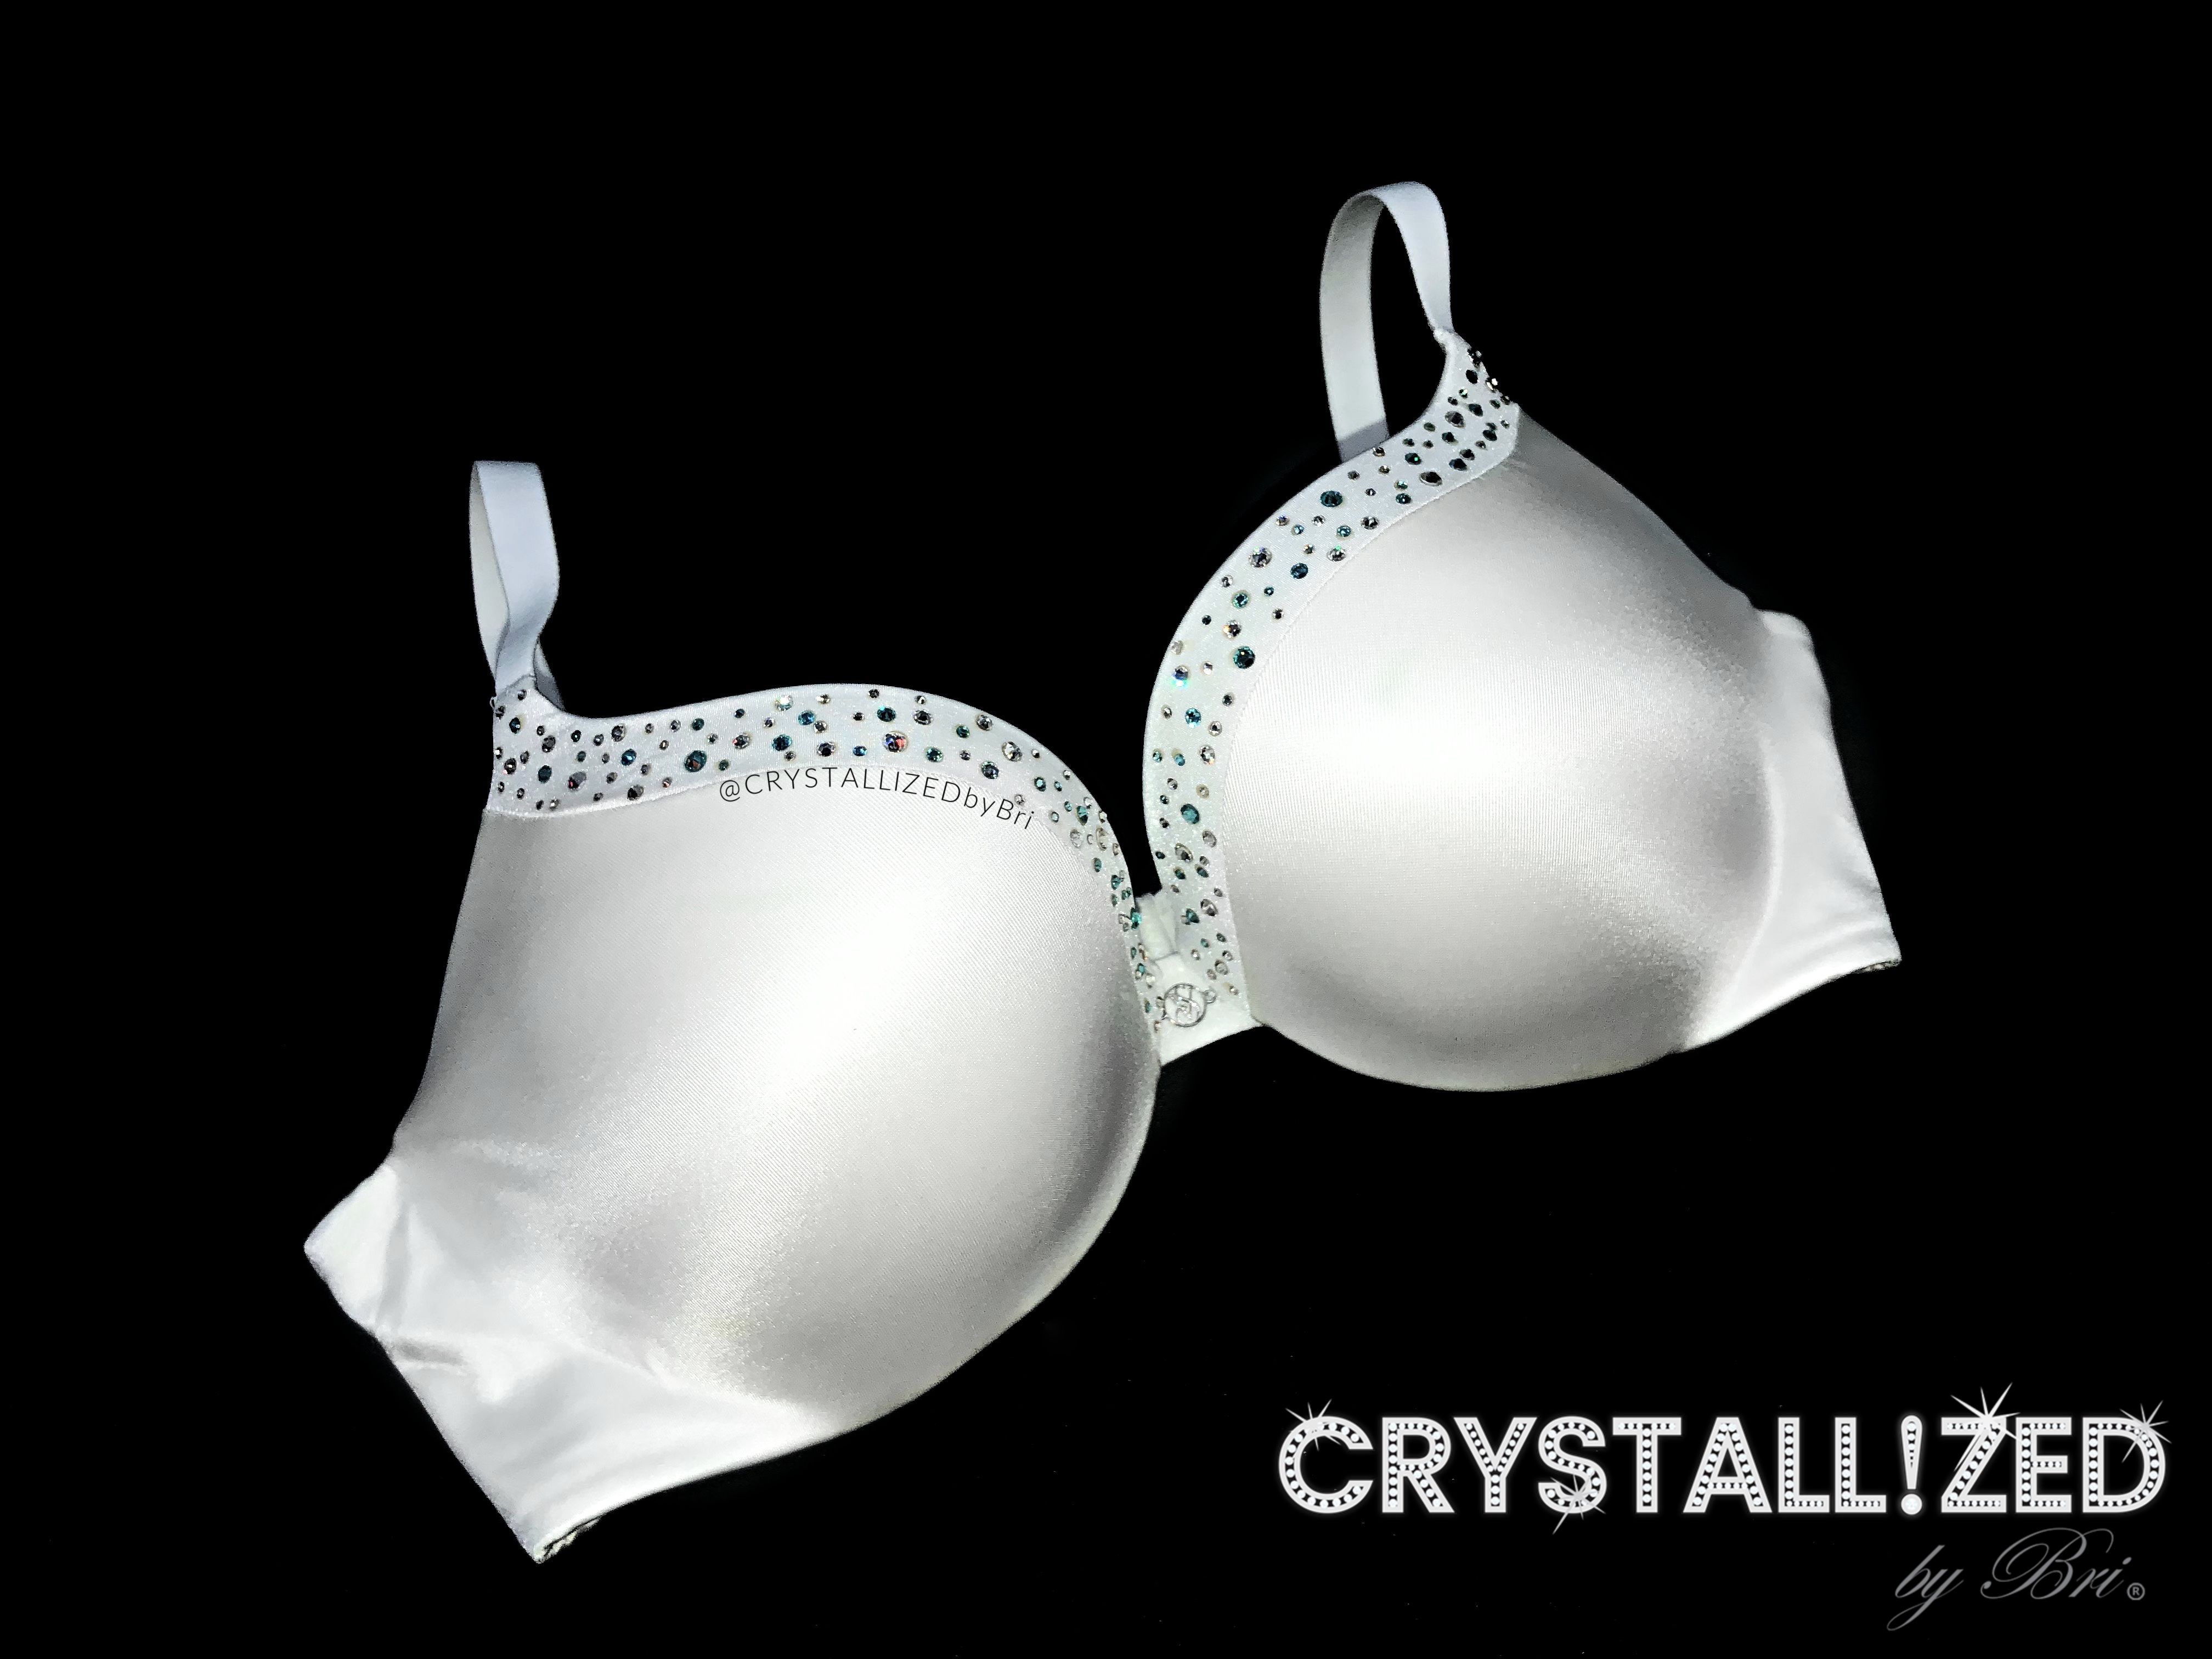 Buy Hand Crafted Crystallized Bling Bridal Push Up Bra Made With Swarovski  Crystals Bedazzled Wedding Night, made to order from CRYSTALL!ZED by Bri,  LLC